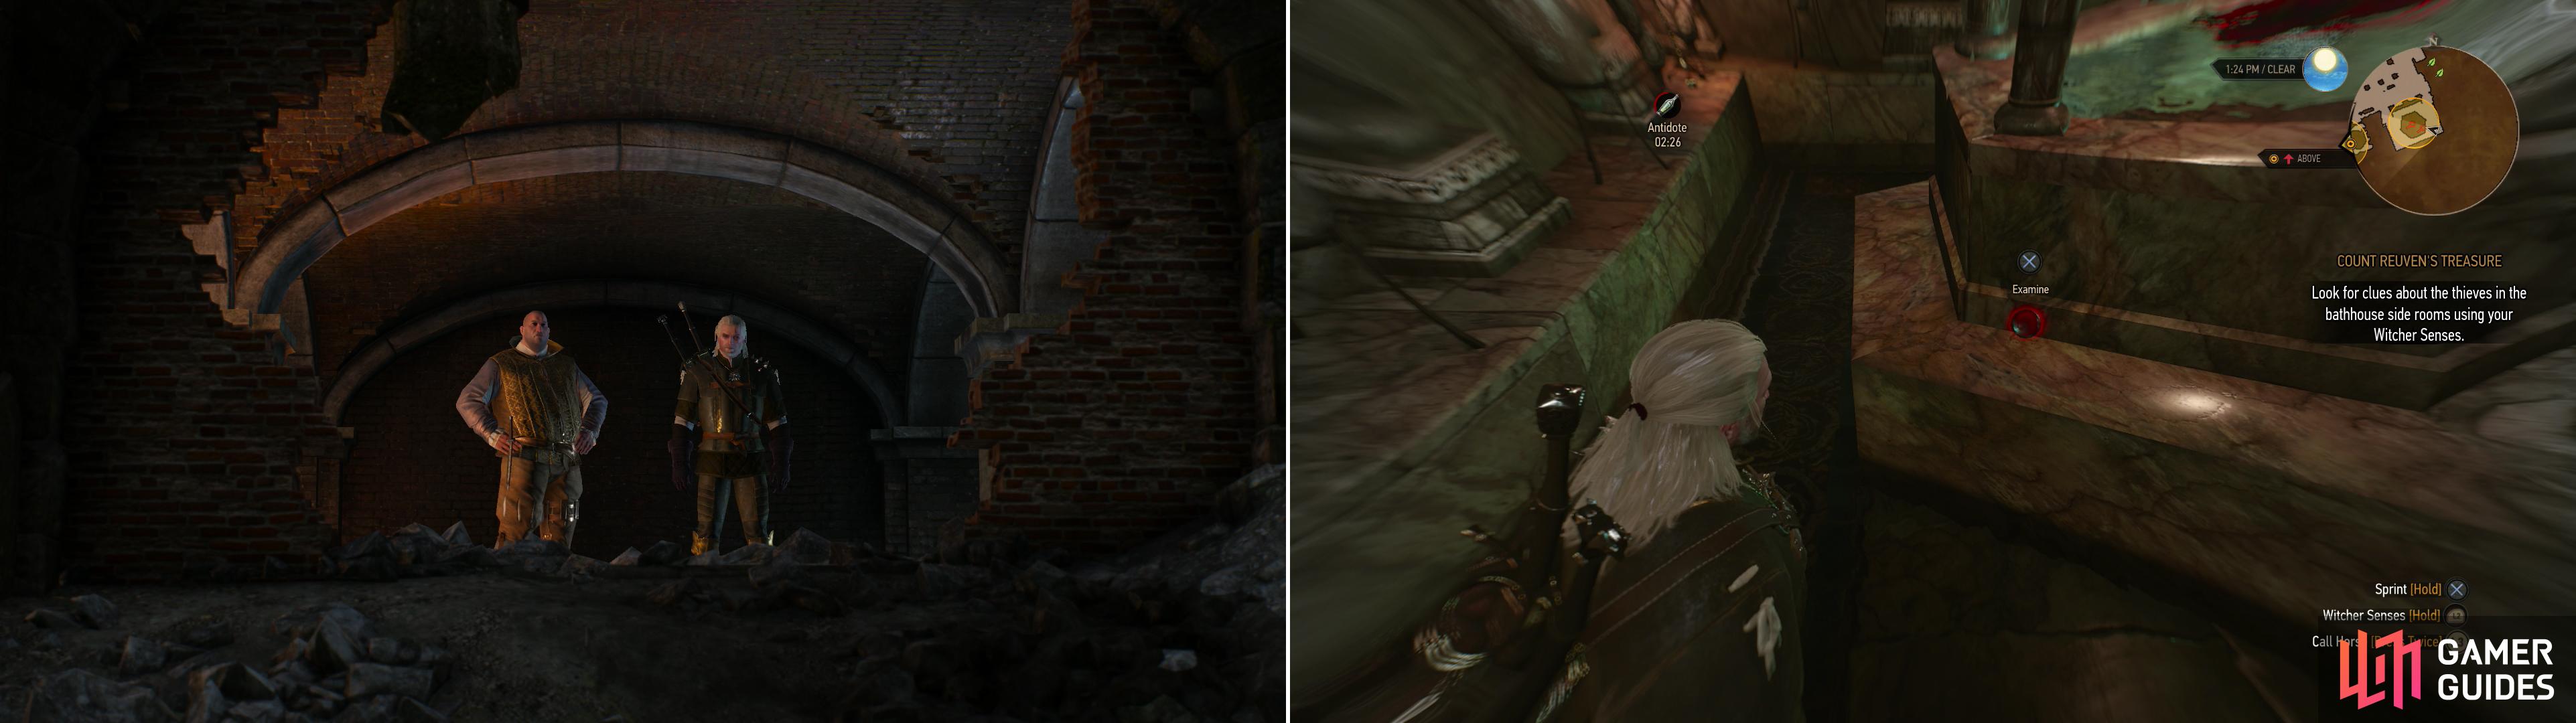 Dijkstra will show you his little "problem" (left). Search the sewers, then the bathhouse to find evidence of the heist (right).